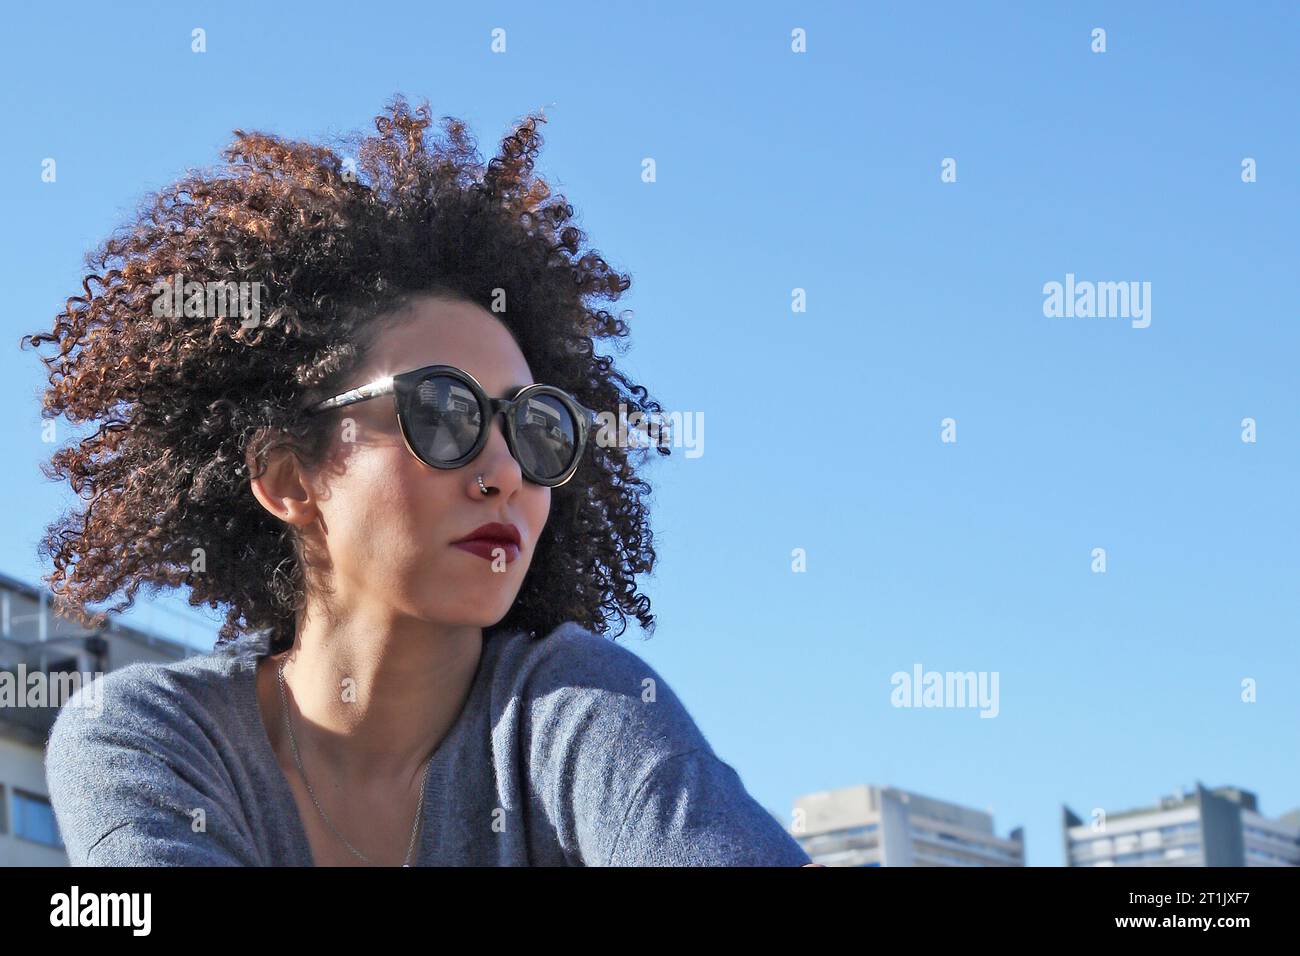 HEAD PORTRAIT OF A CURLY HAIR WOMAN WITH SUNGLASSES ON A HOT SUNNY DAY Stock Photo